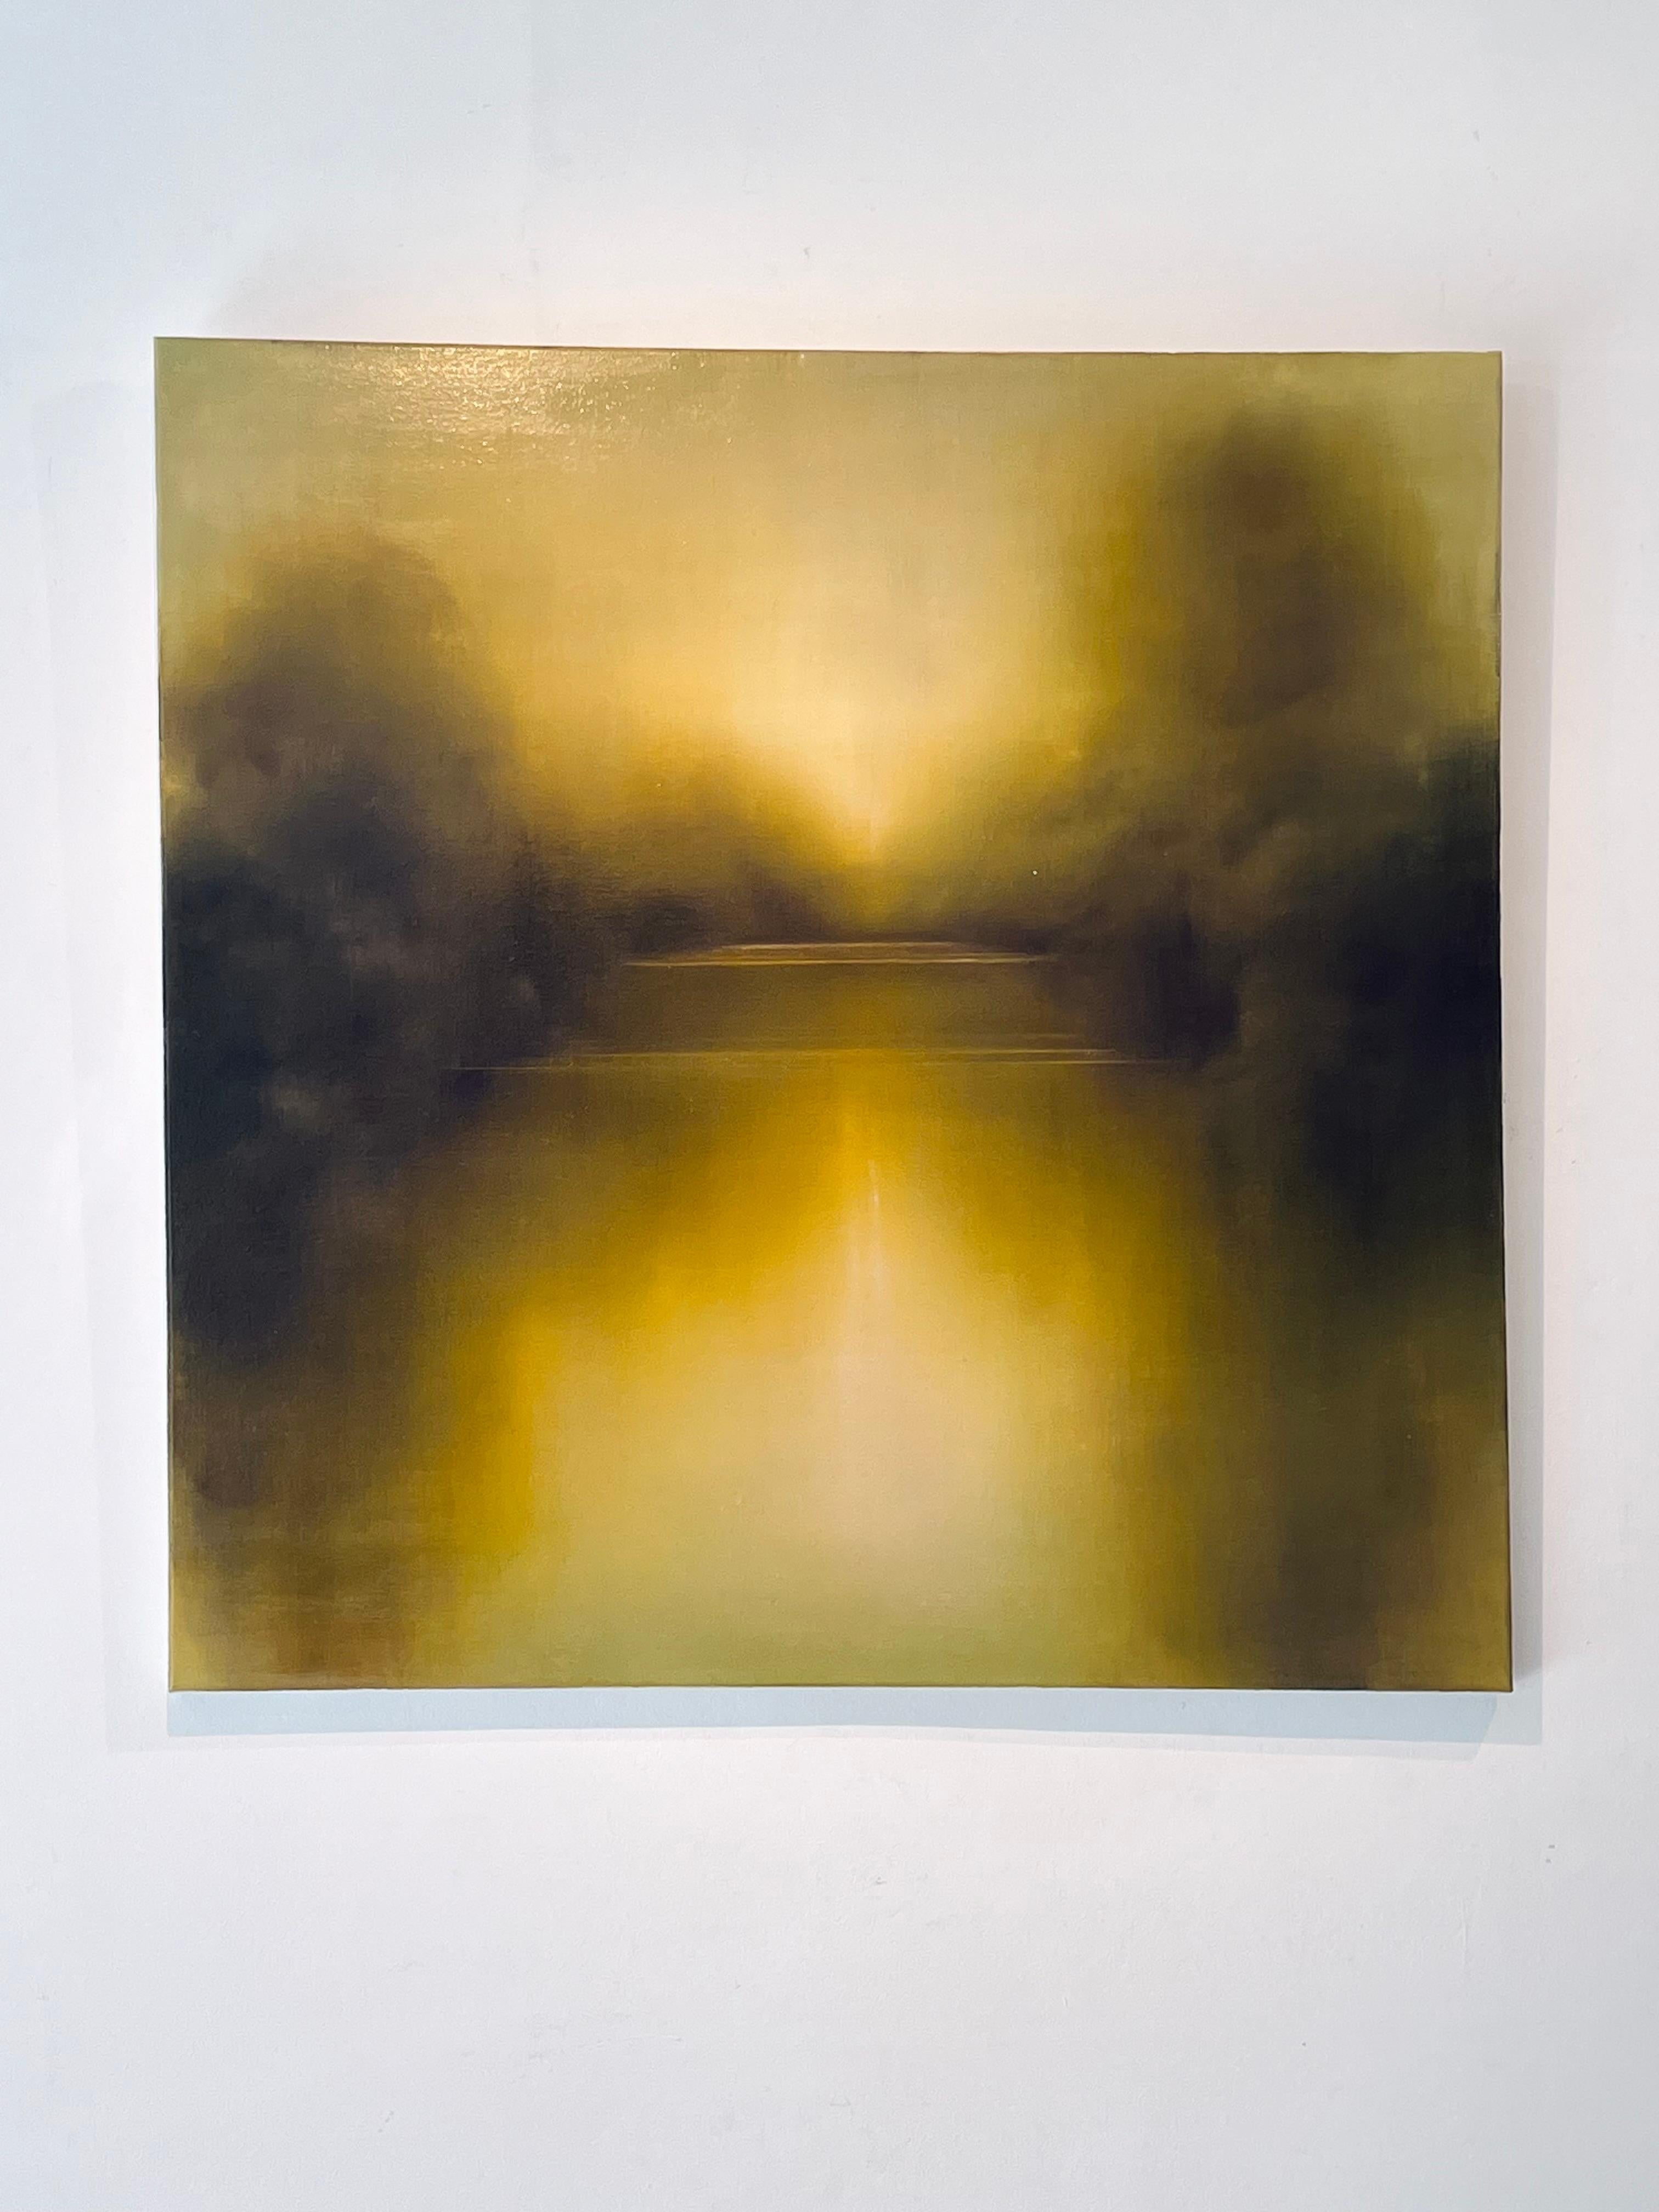 Golden August Waters-original abstract waterscape oil painting-contemporary Art - Painting by Louse Fairchild